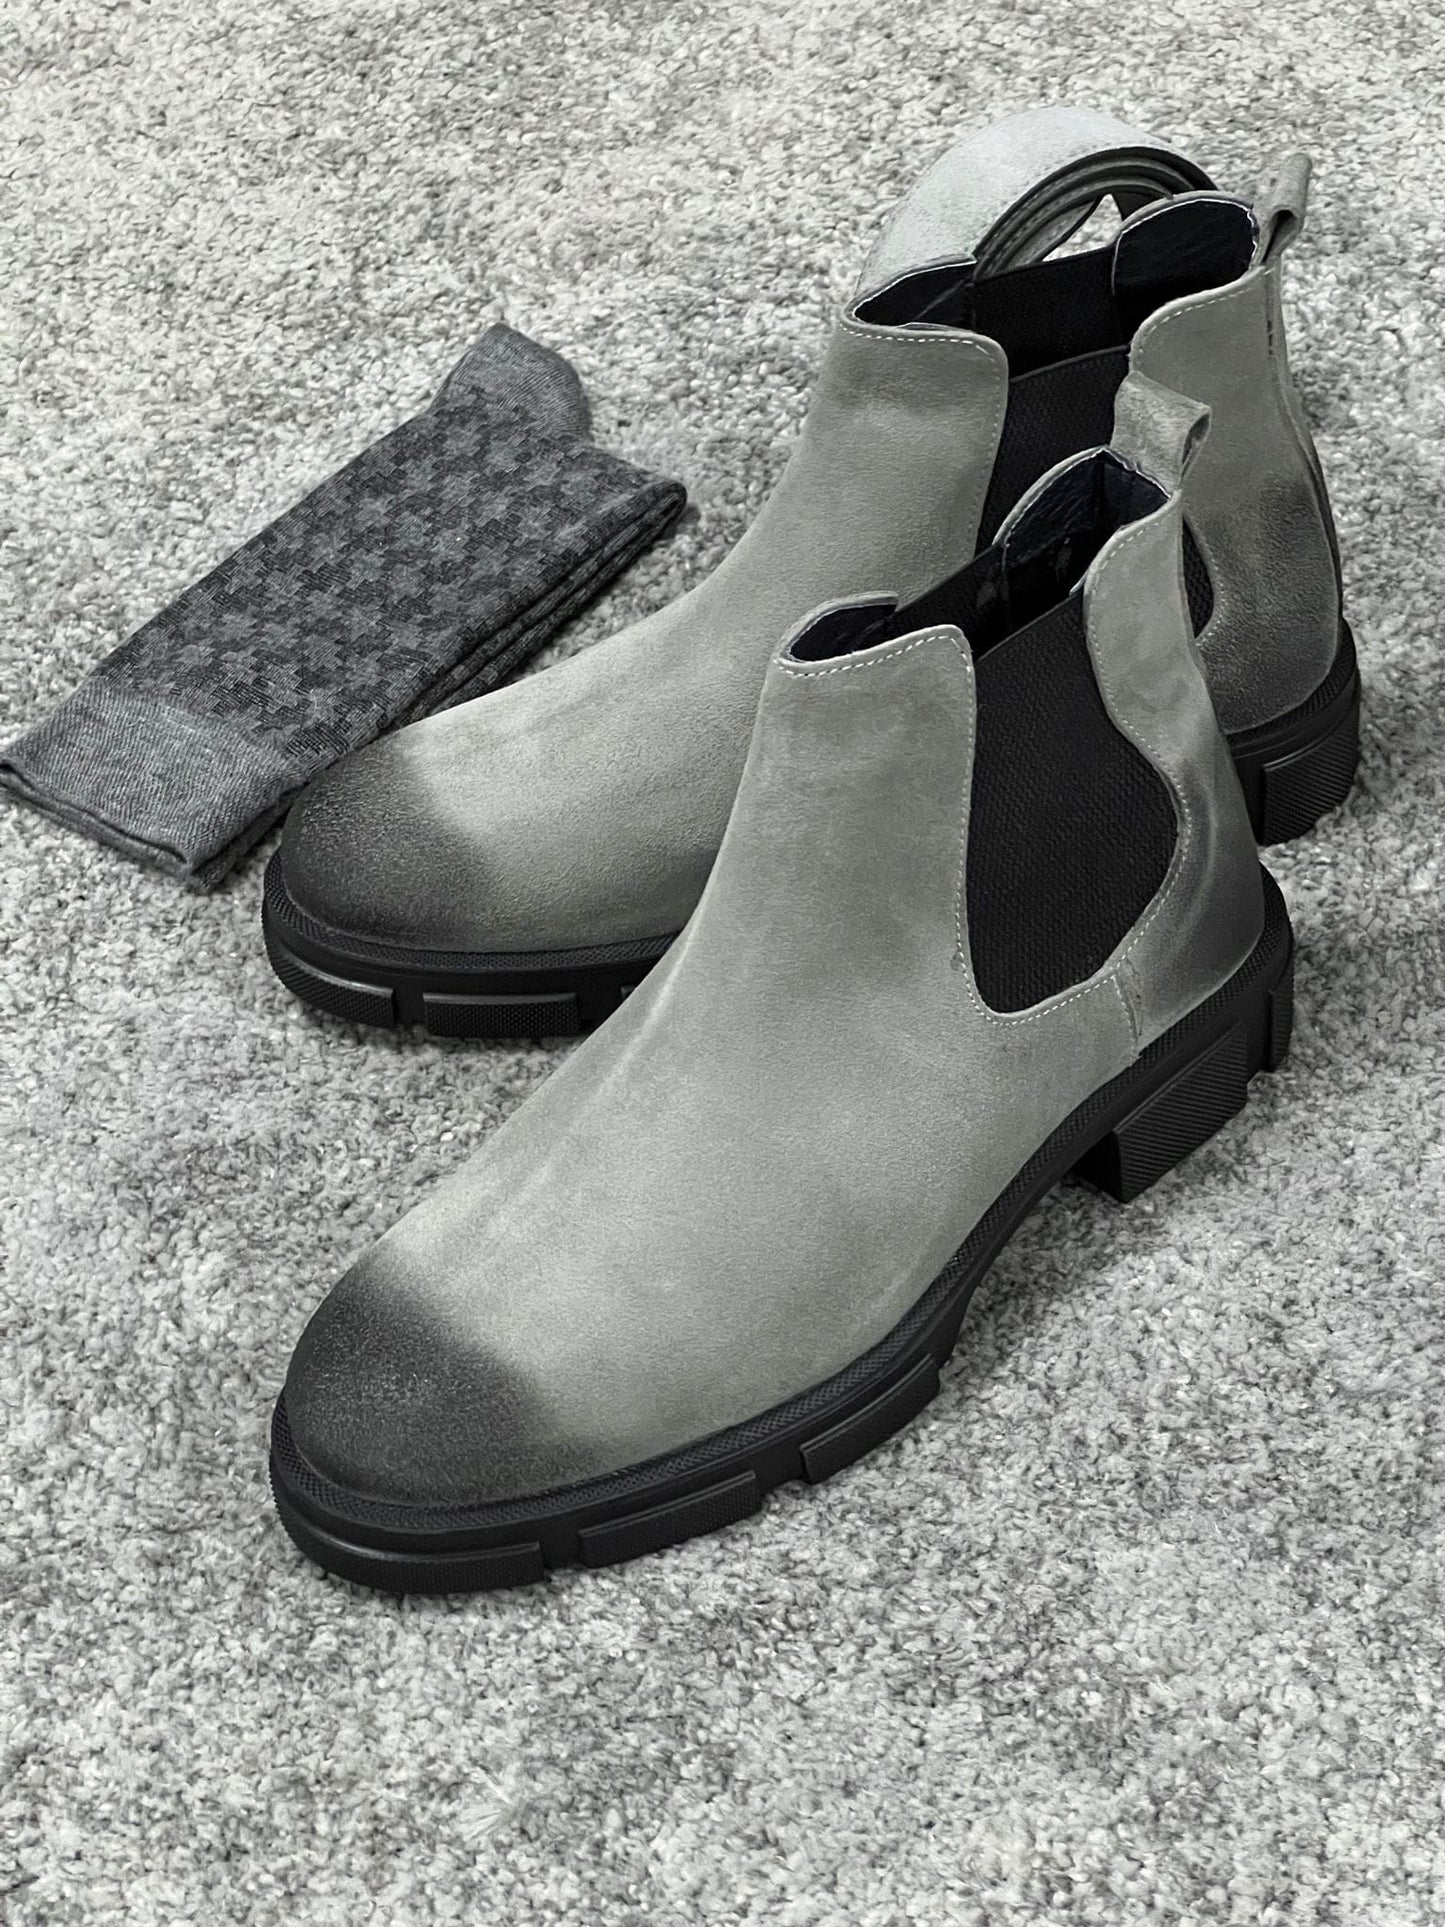 
                  
                    Suede Leather Gray Winter Men’s Boots
                  
                